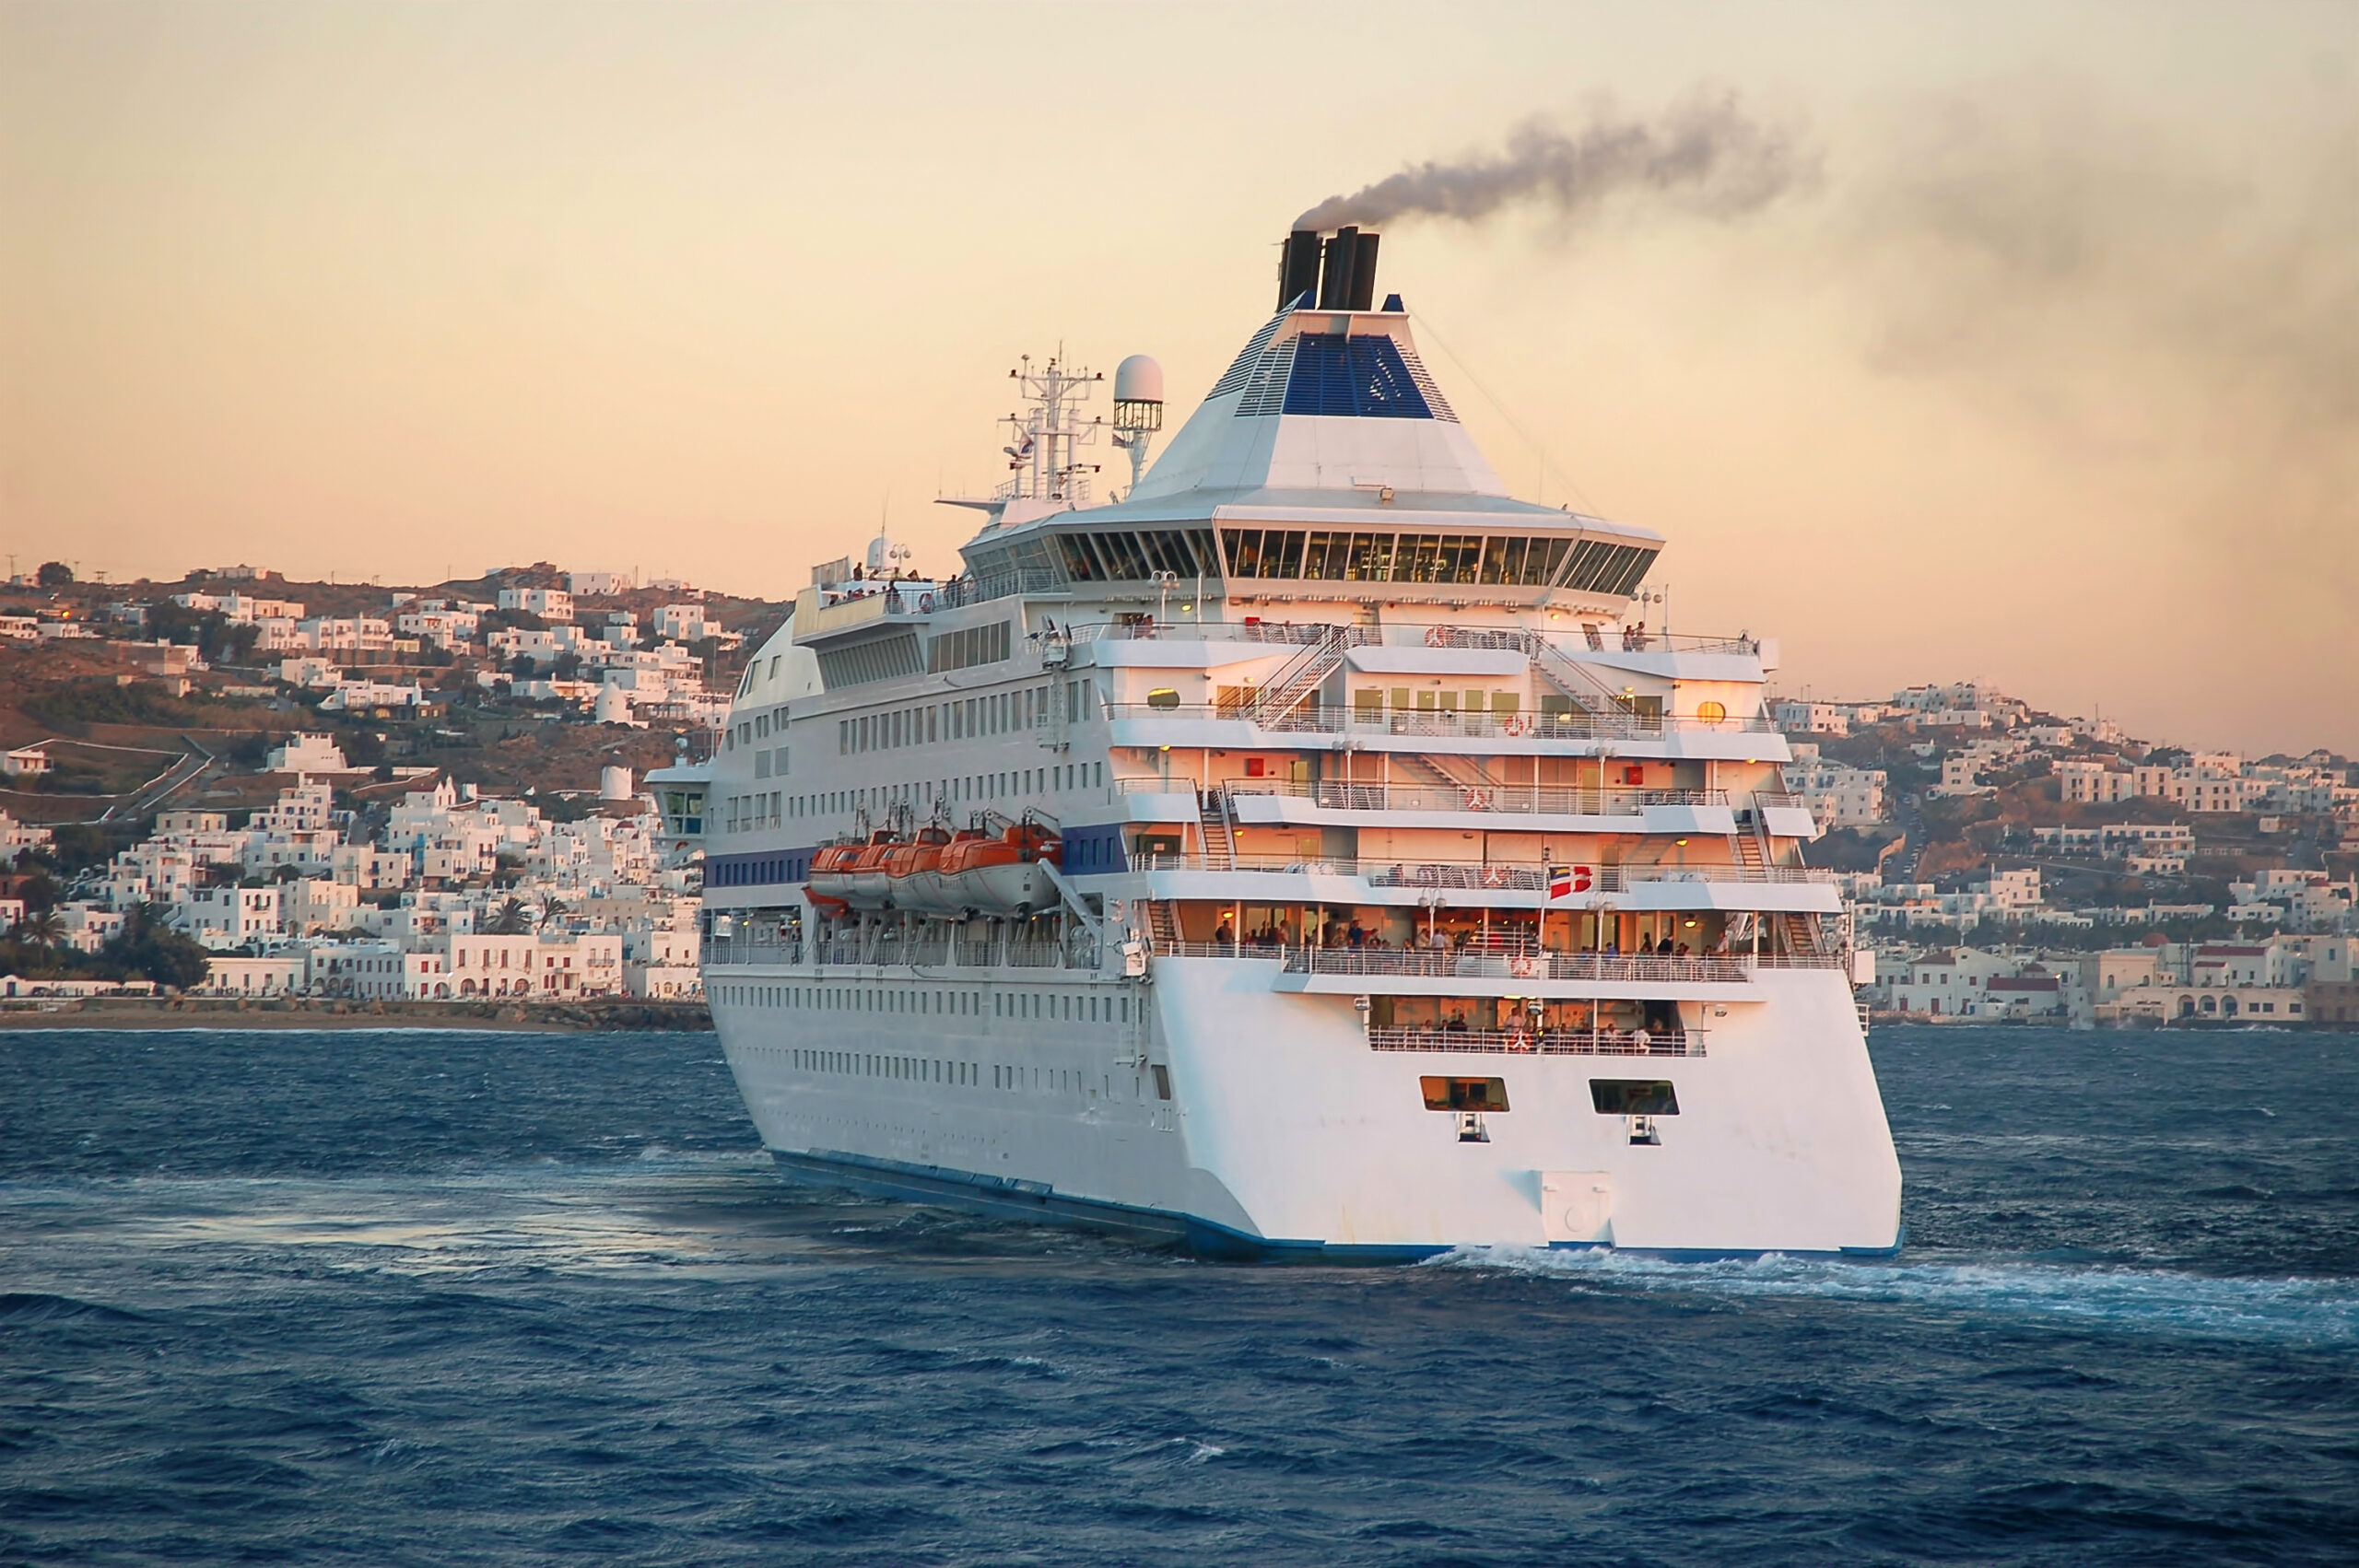 Greece to Cap Number of Cruise Ships to combat over-tourism